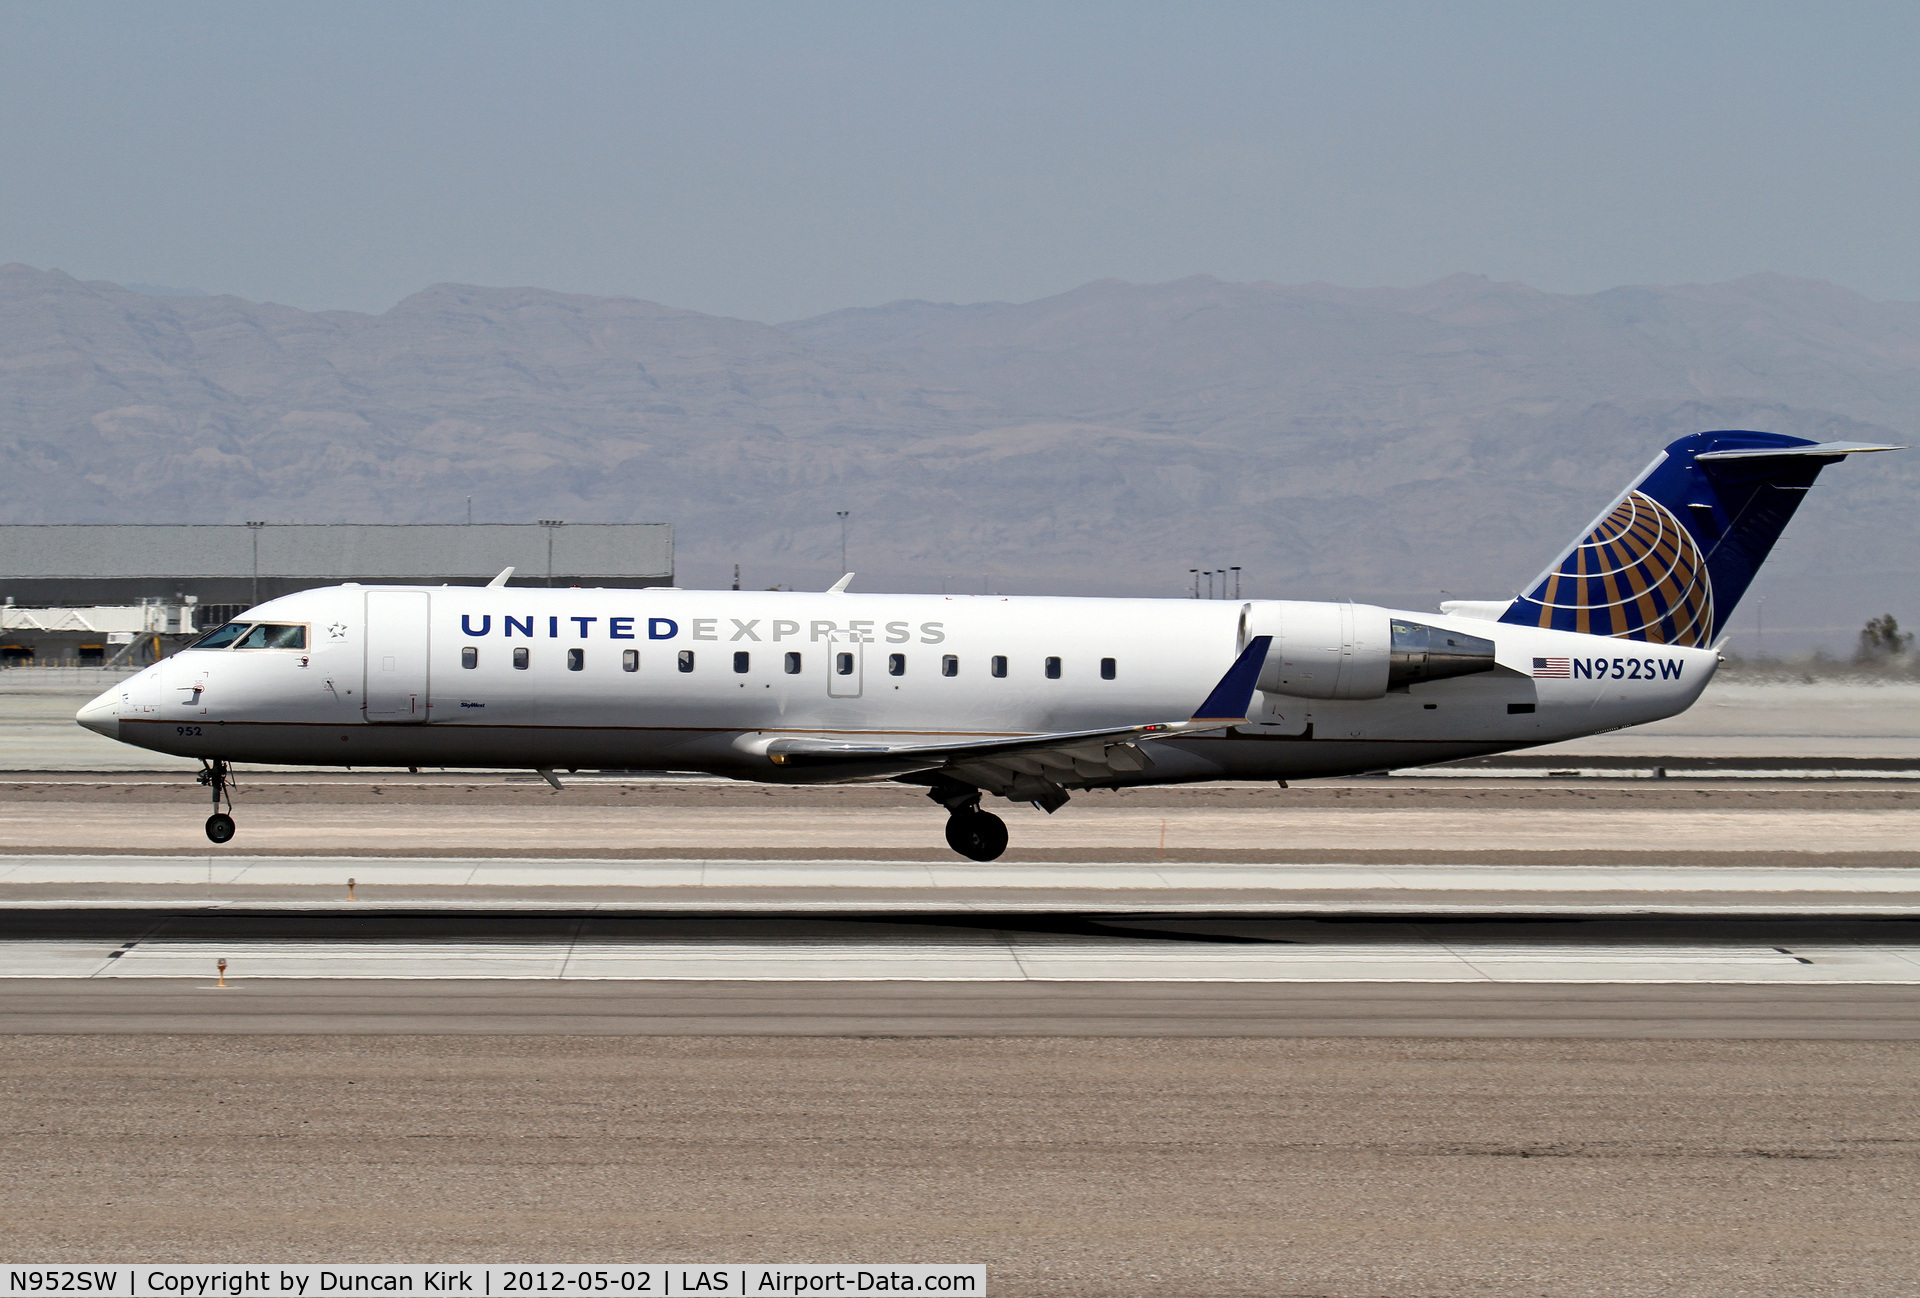 N952SW, 2003 Bombardier CRJ-200LR (CL-600-2B19) C/N 7805, Touching down at the famous viewing spot